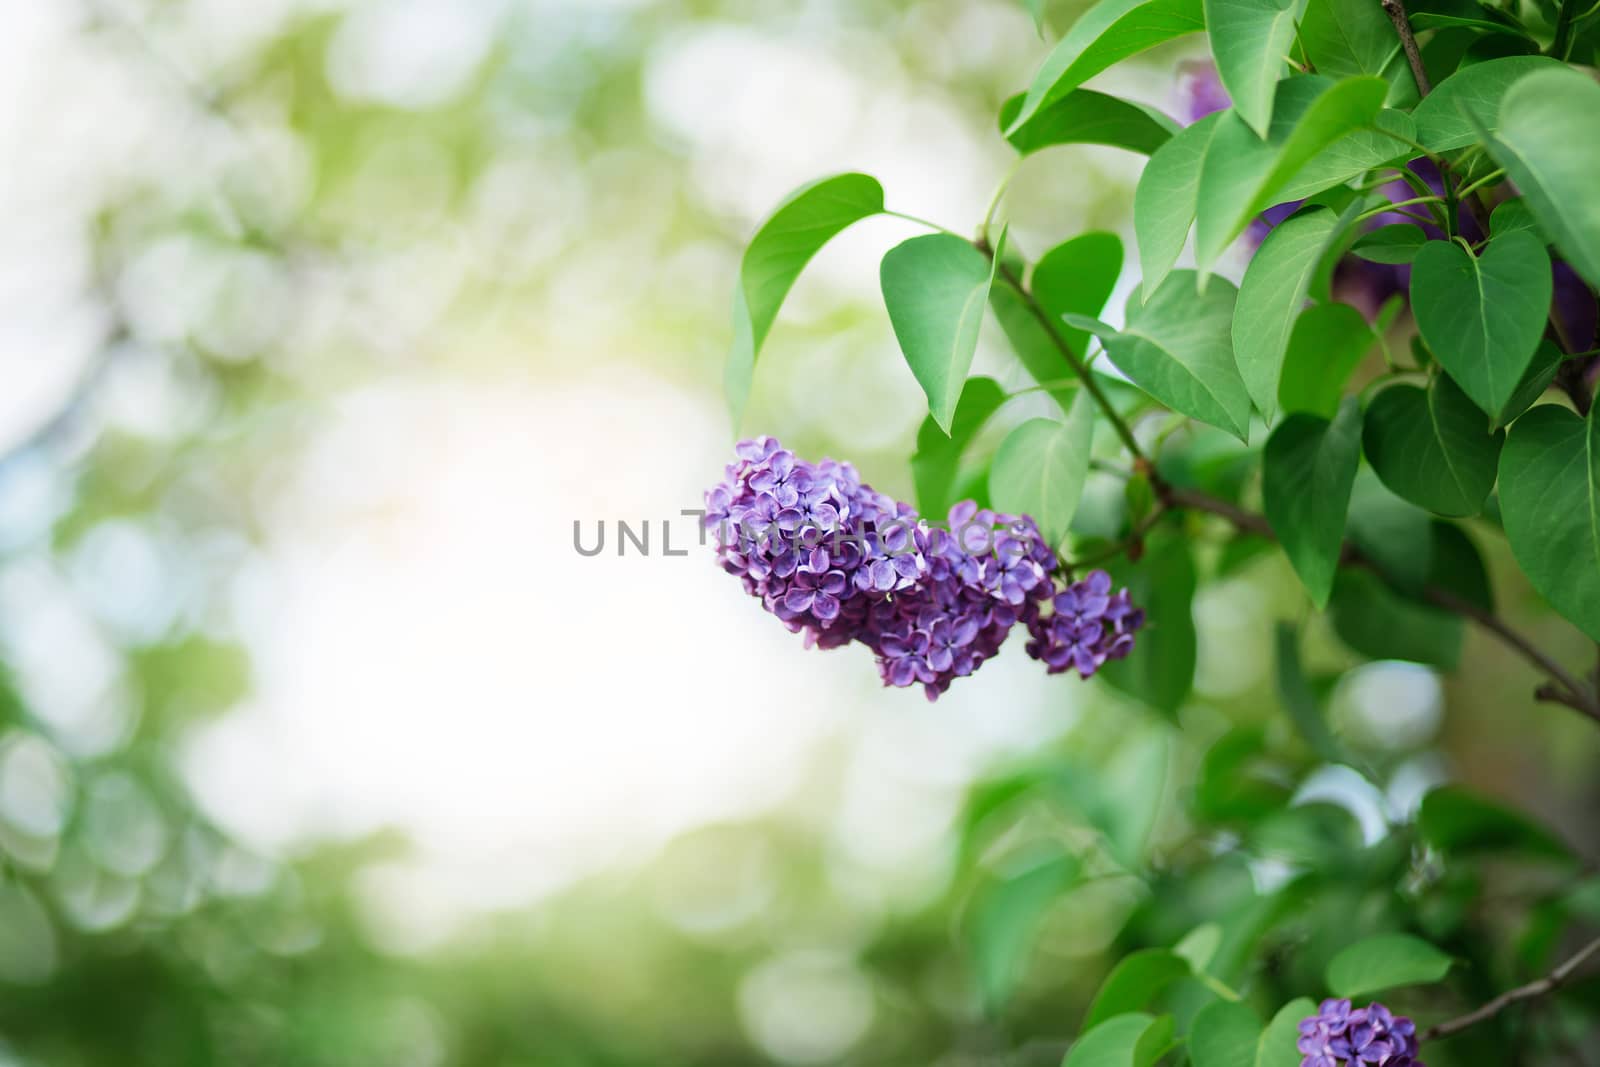 Floral natural background. Lilac flowers close up. Lilac flowers background. Macro image of spring lilac violet flowers. Branch of lilac flowers with the leaves.